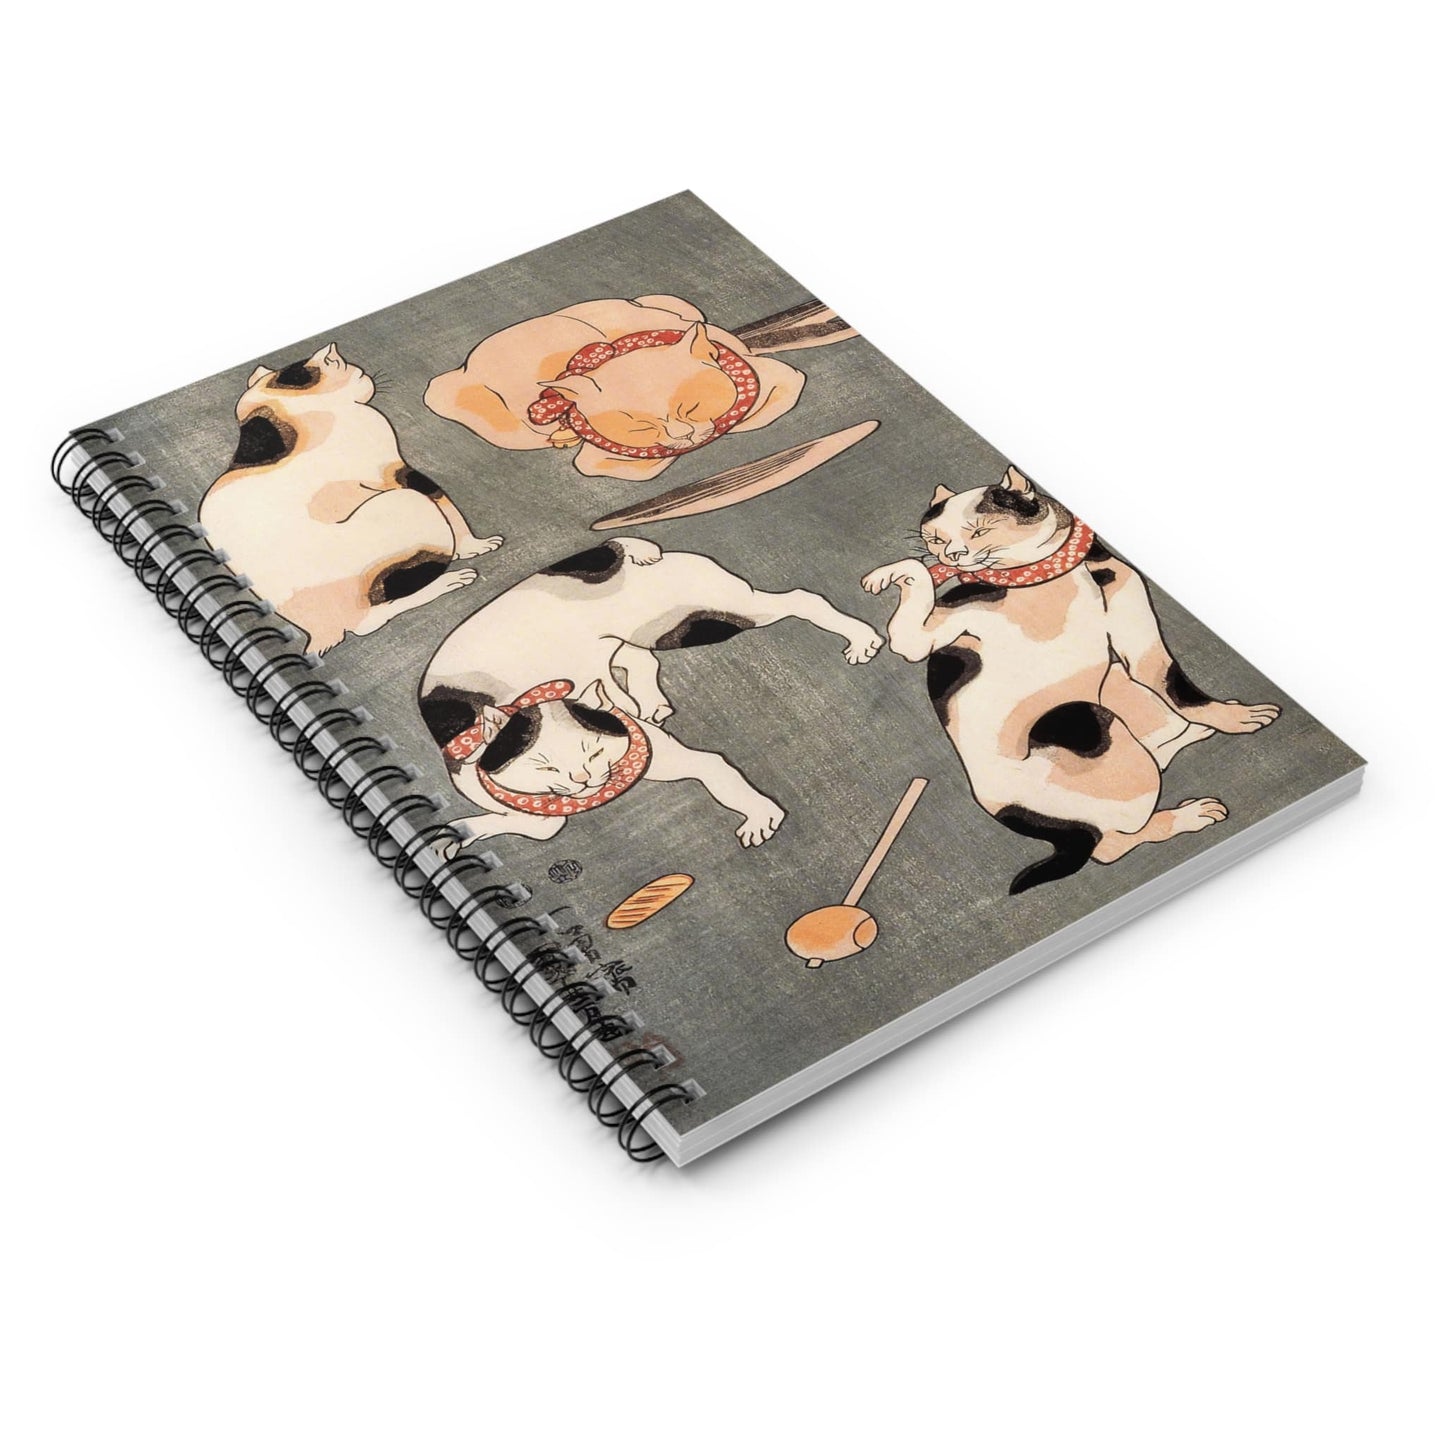 Japanese Cats Spiral Notebook Laying Flat on White Surface